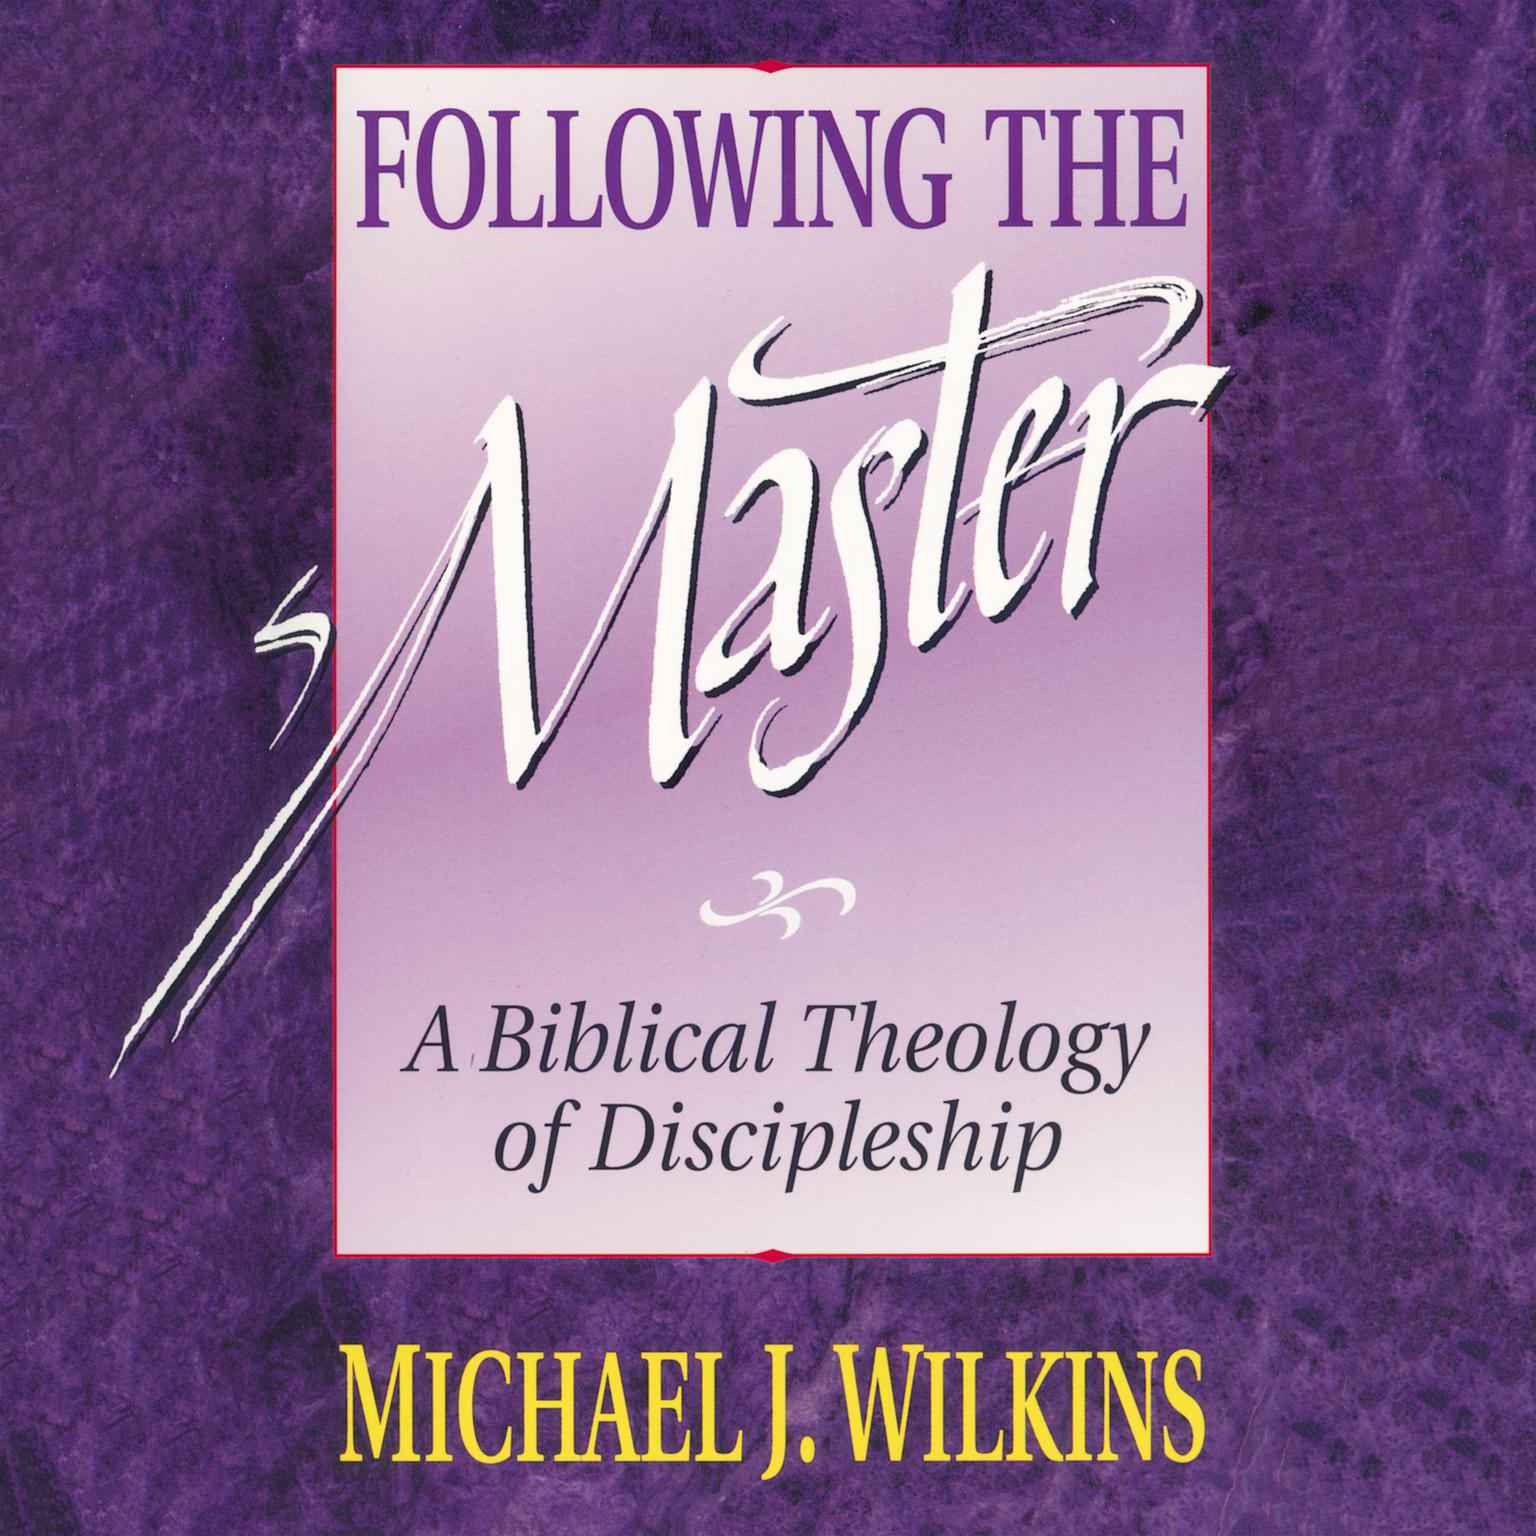 Following the Master: A Biblical Theology of Discipleship Audiobook, by Michael J. Wilkins